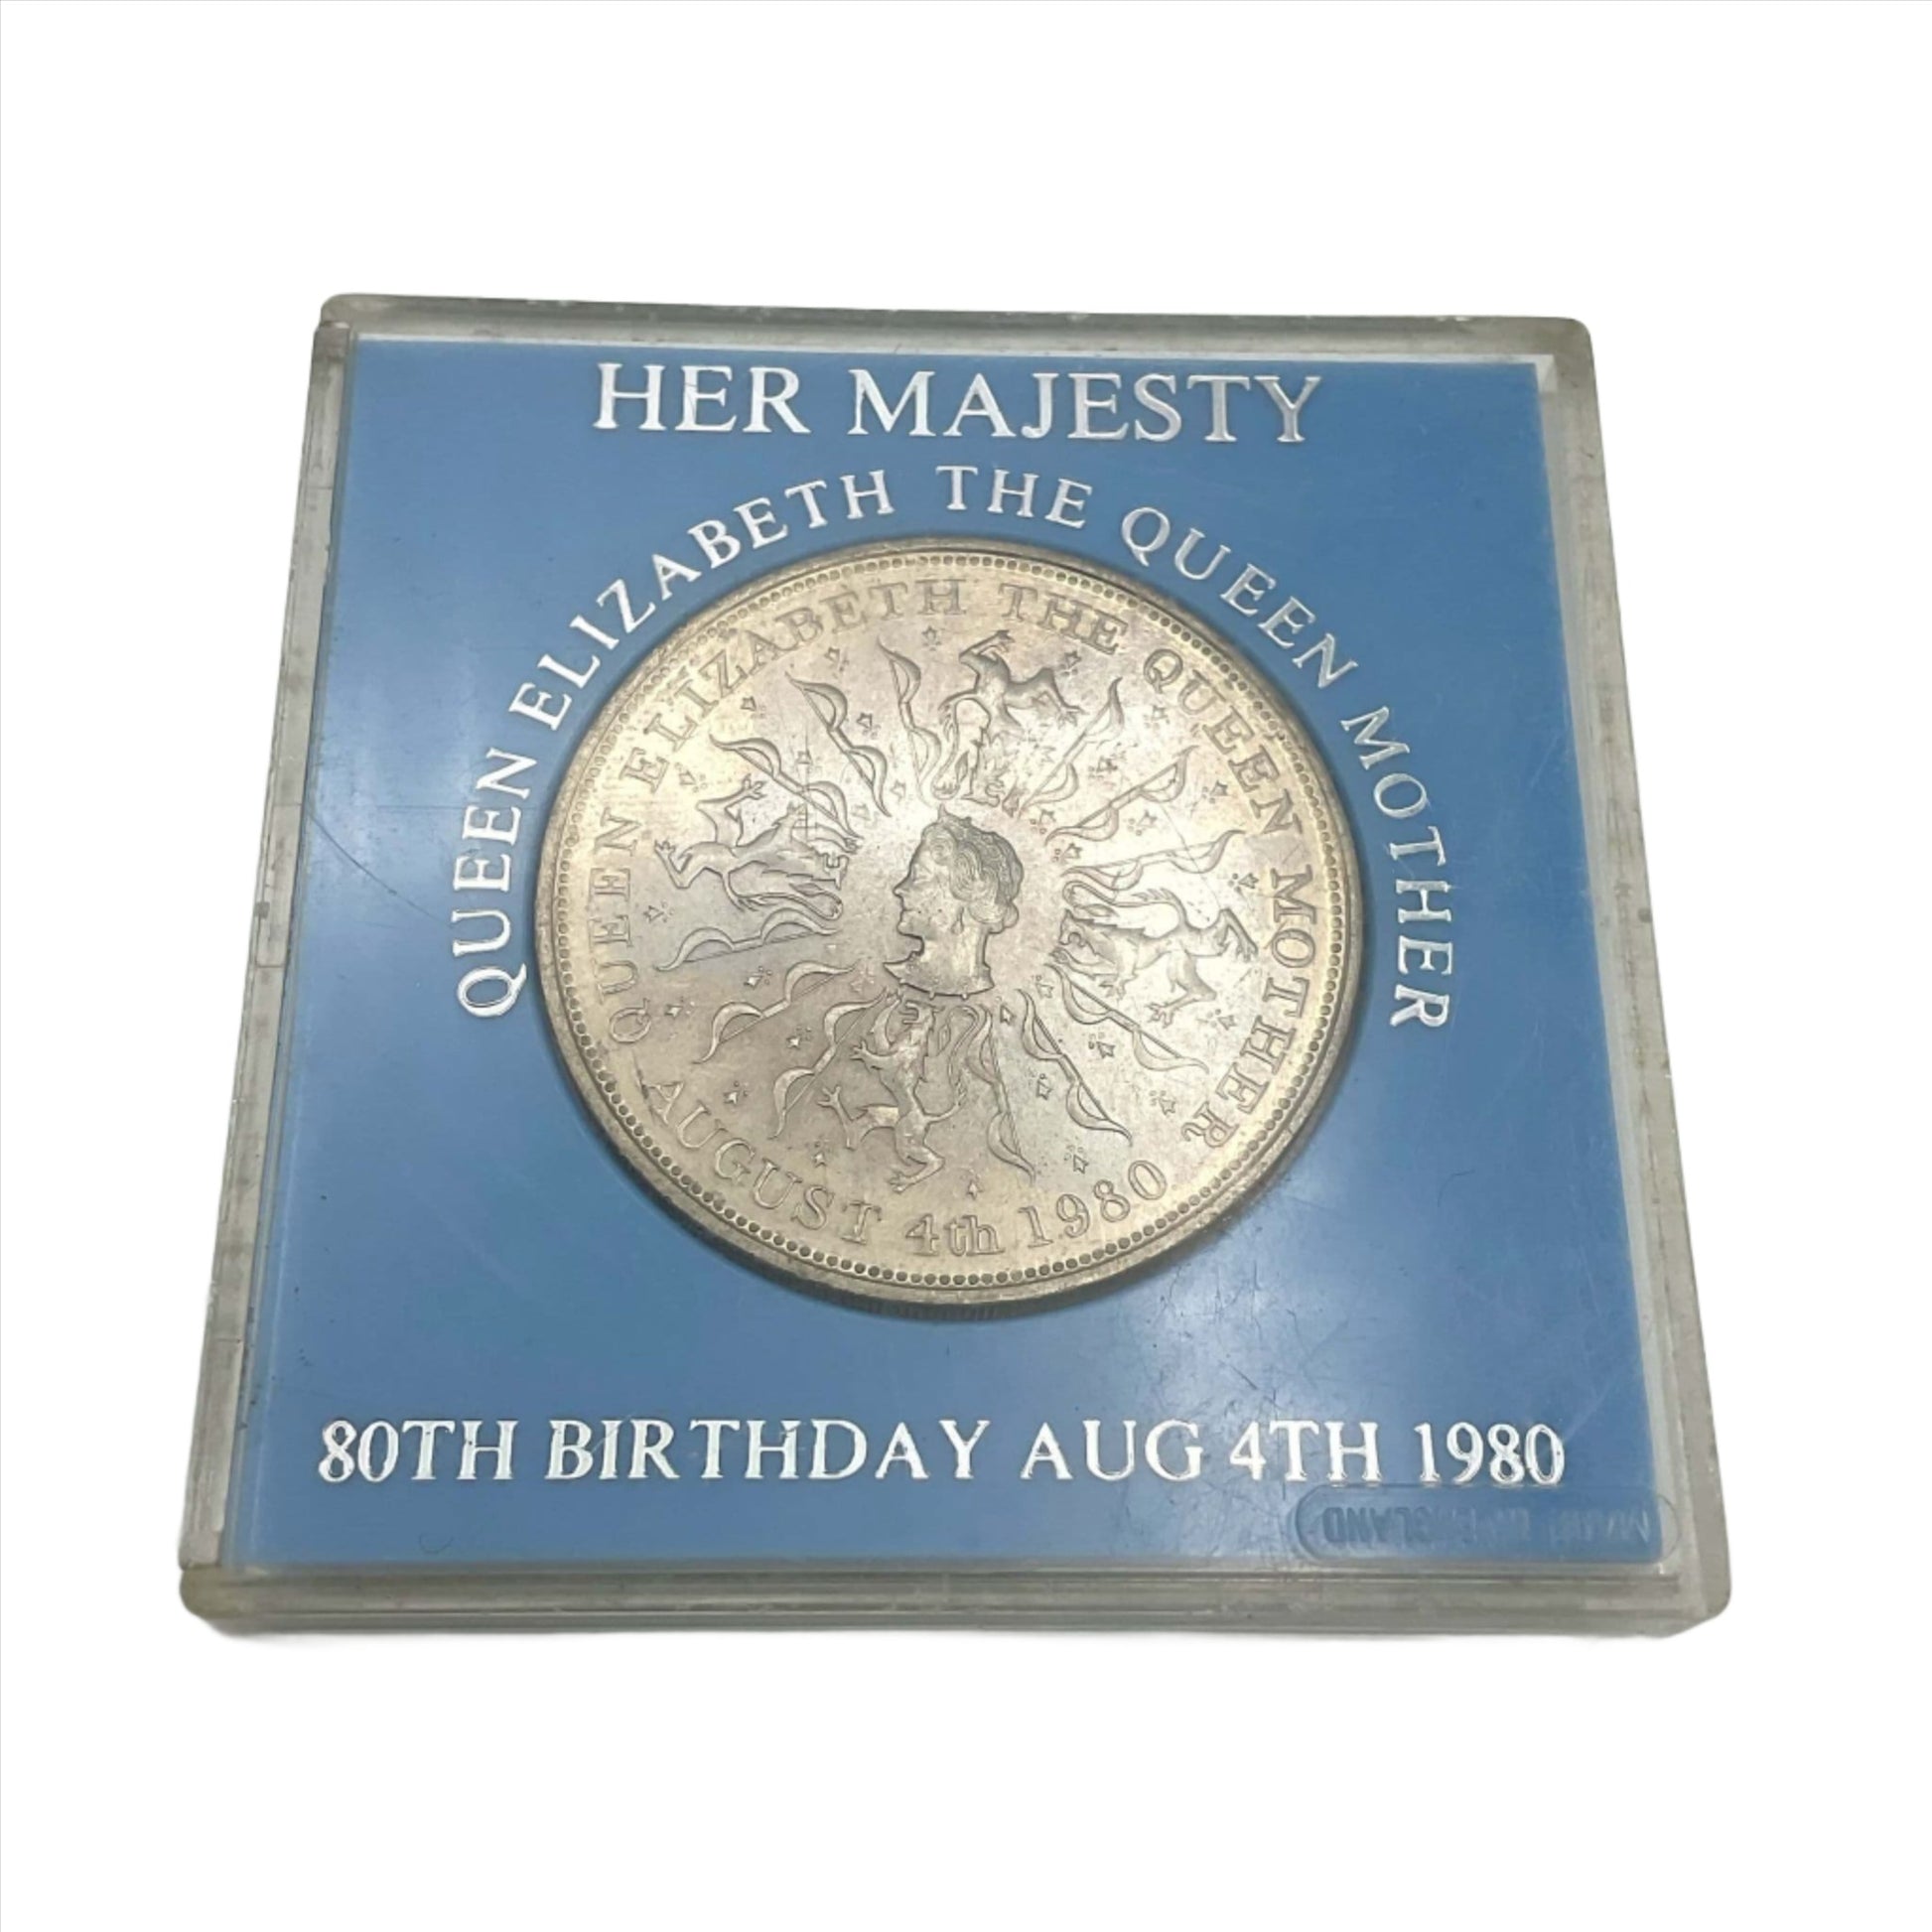 Silver coin featuring the Queen Mother's head in a light blue case